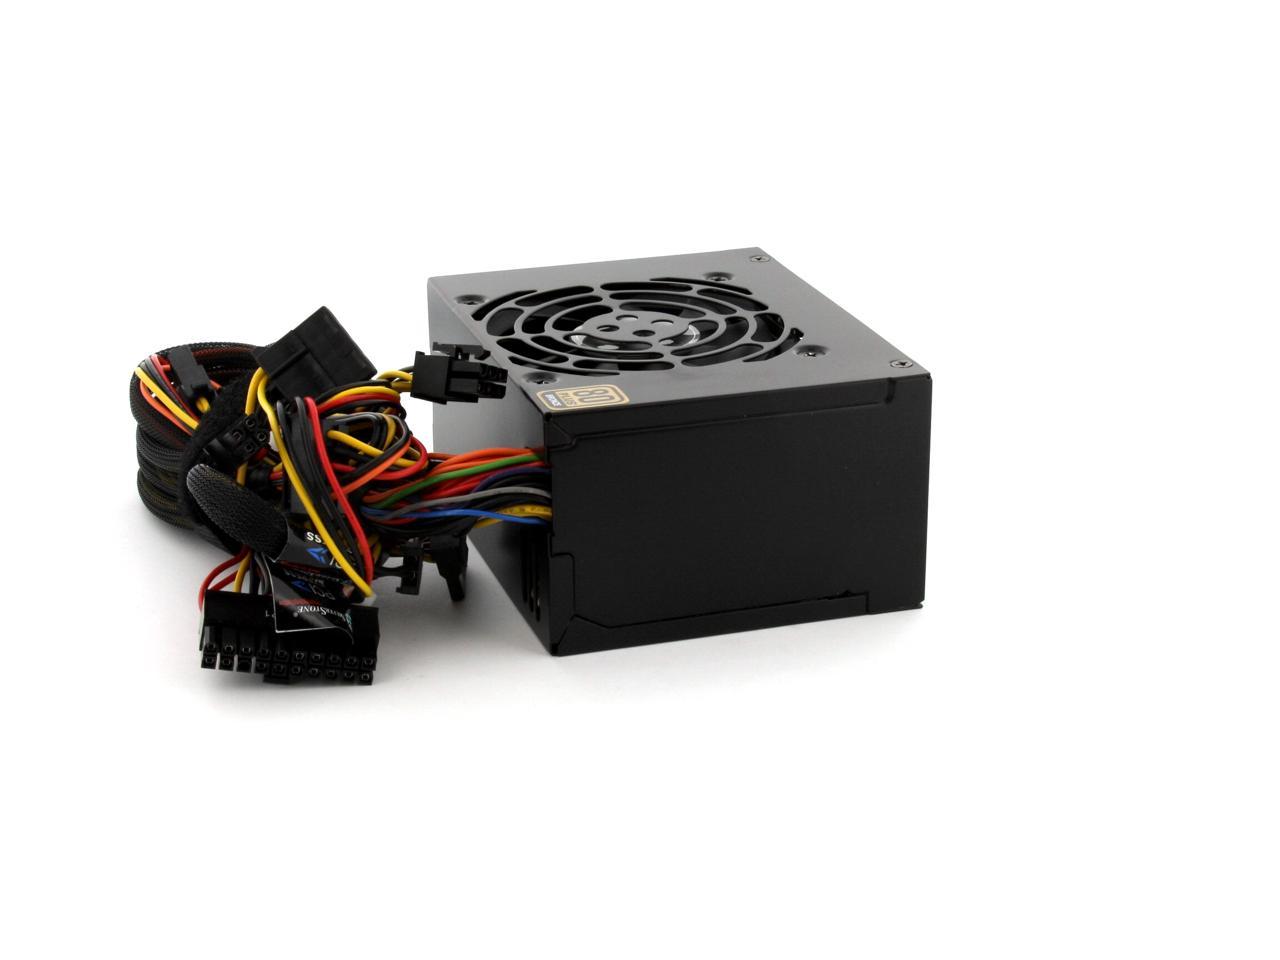 SilverStone ST45SF 450 W SFX12V 80 PLUS BRONZE Certified Active PFC Power  Supply